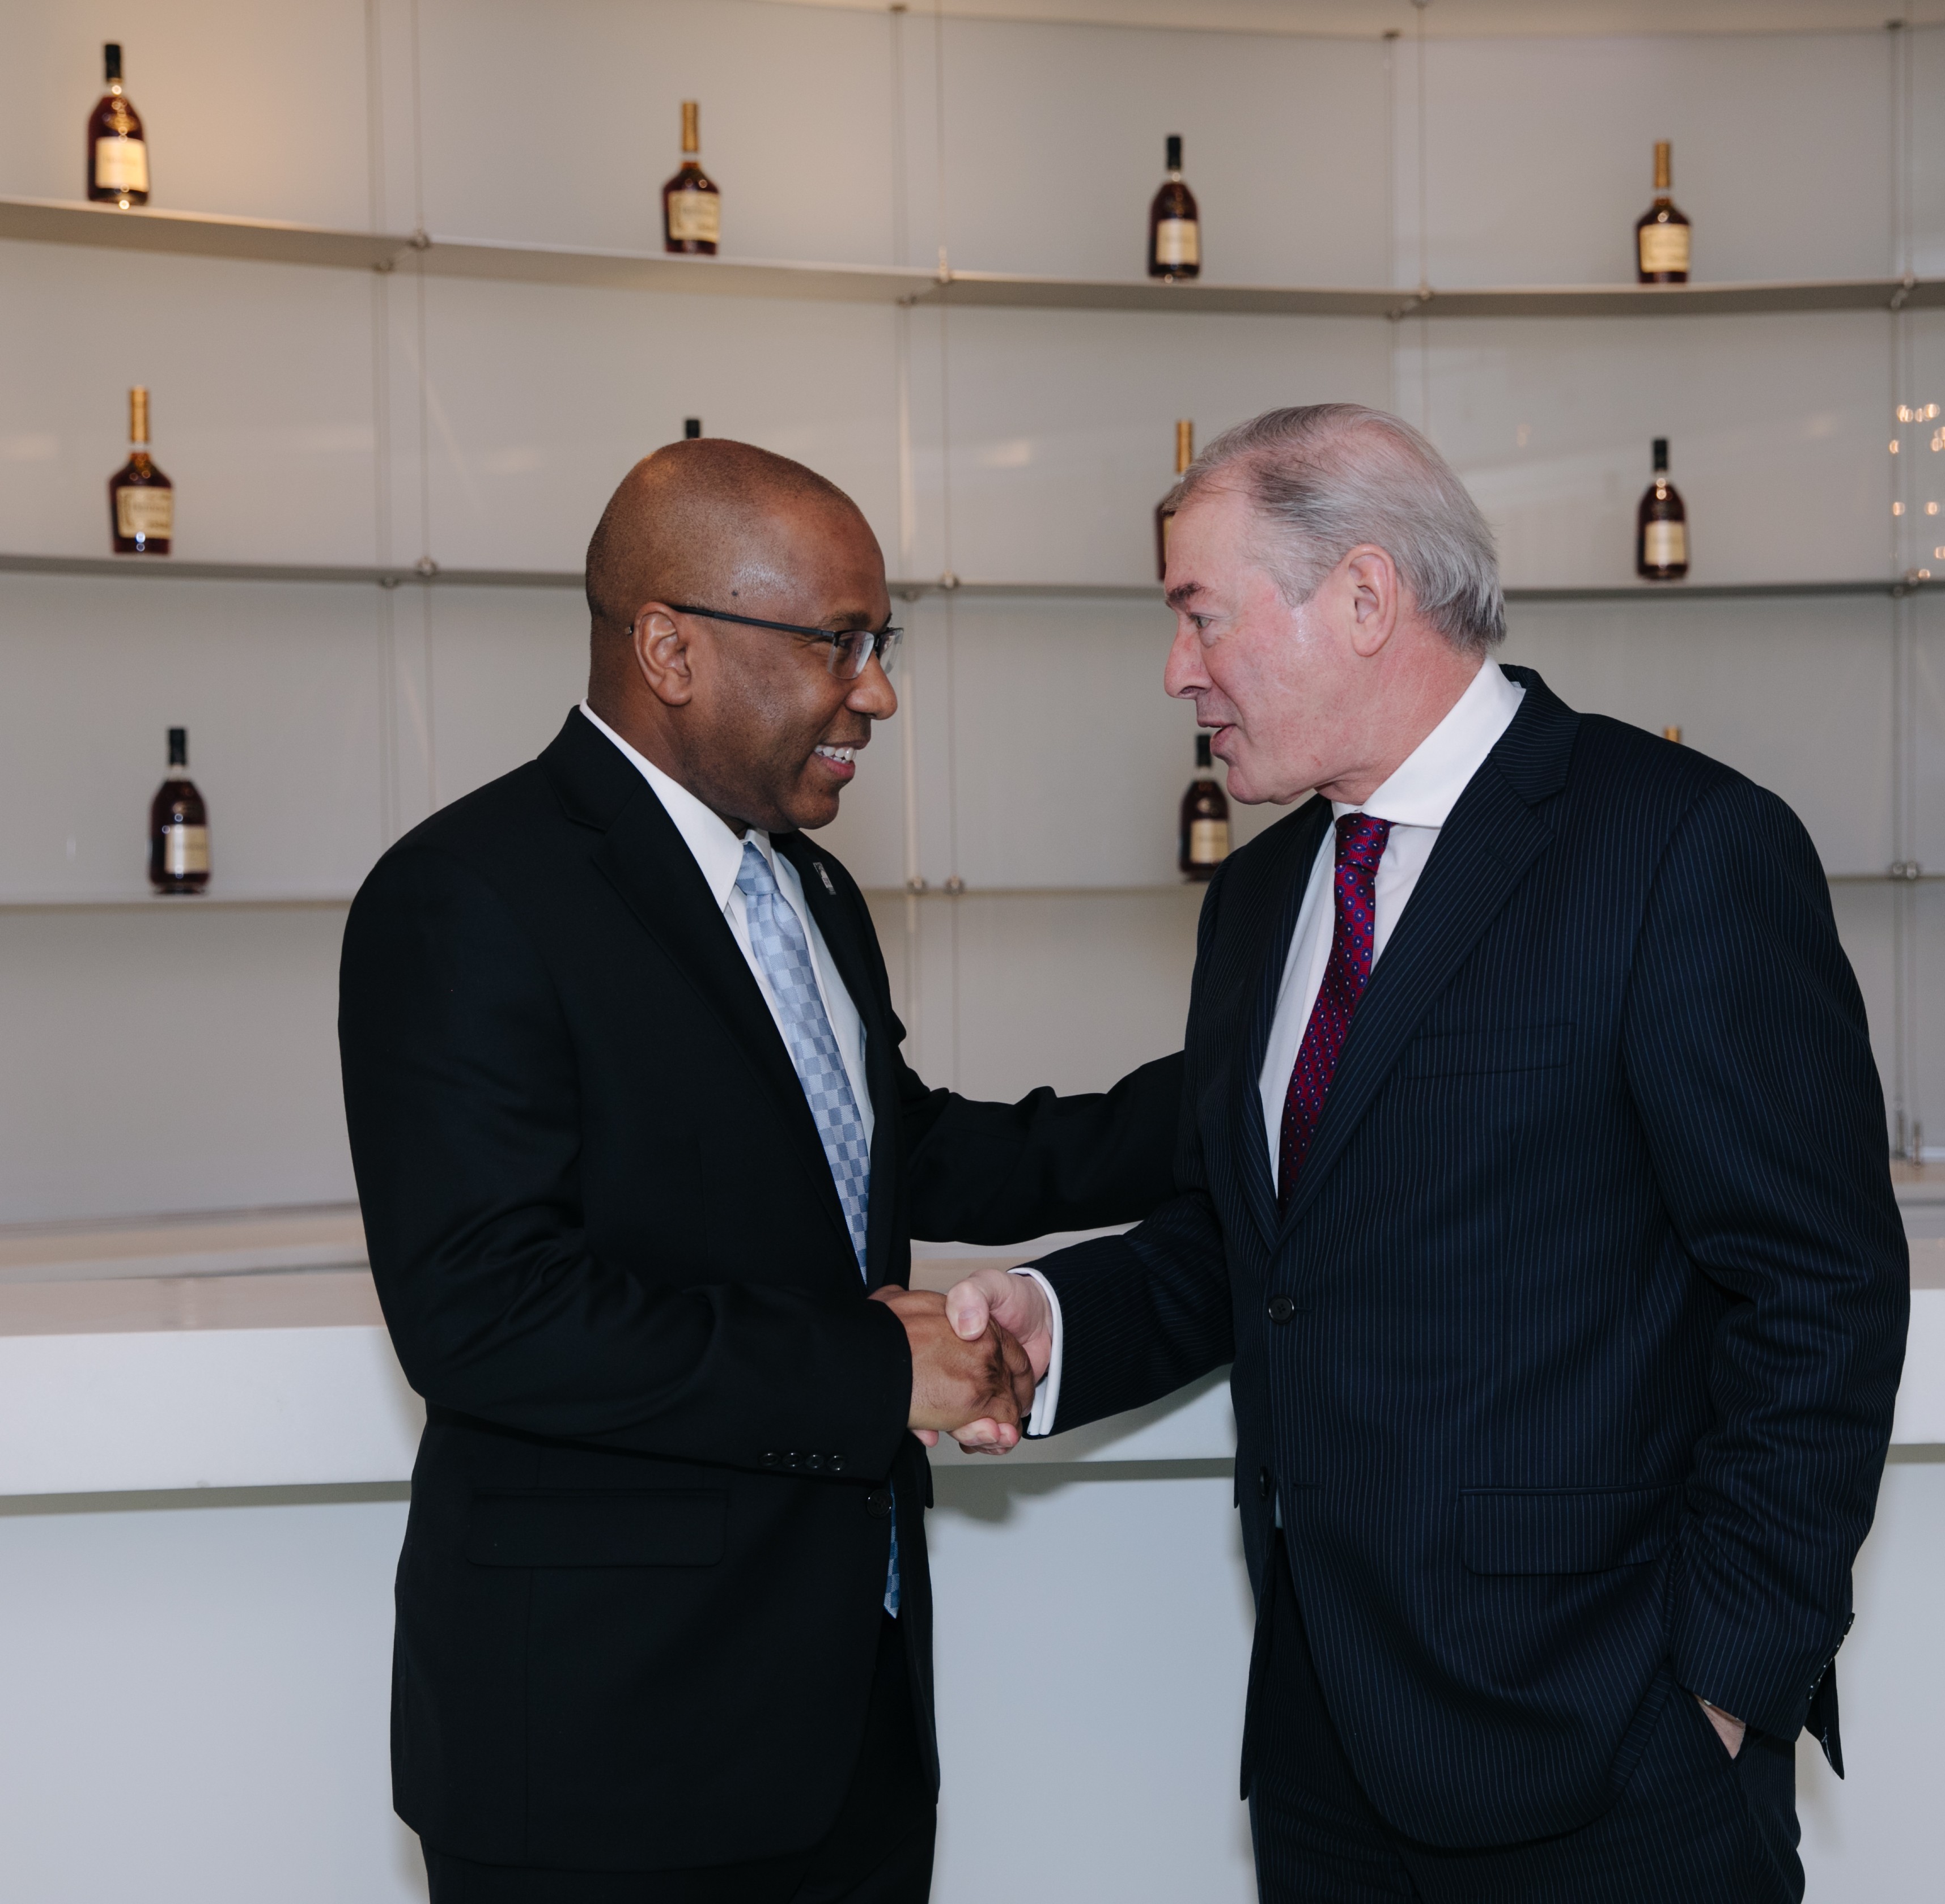 Dr. Harry L. Williams, the President and CEO of TMCF, and Jim Clerkin, the President and CEO of Moet Hennessy North America